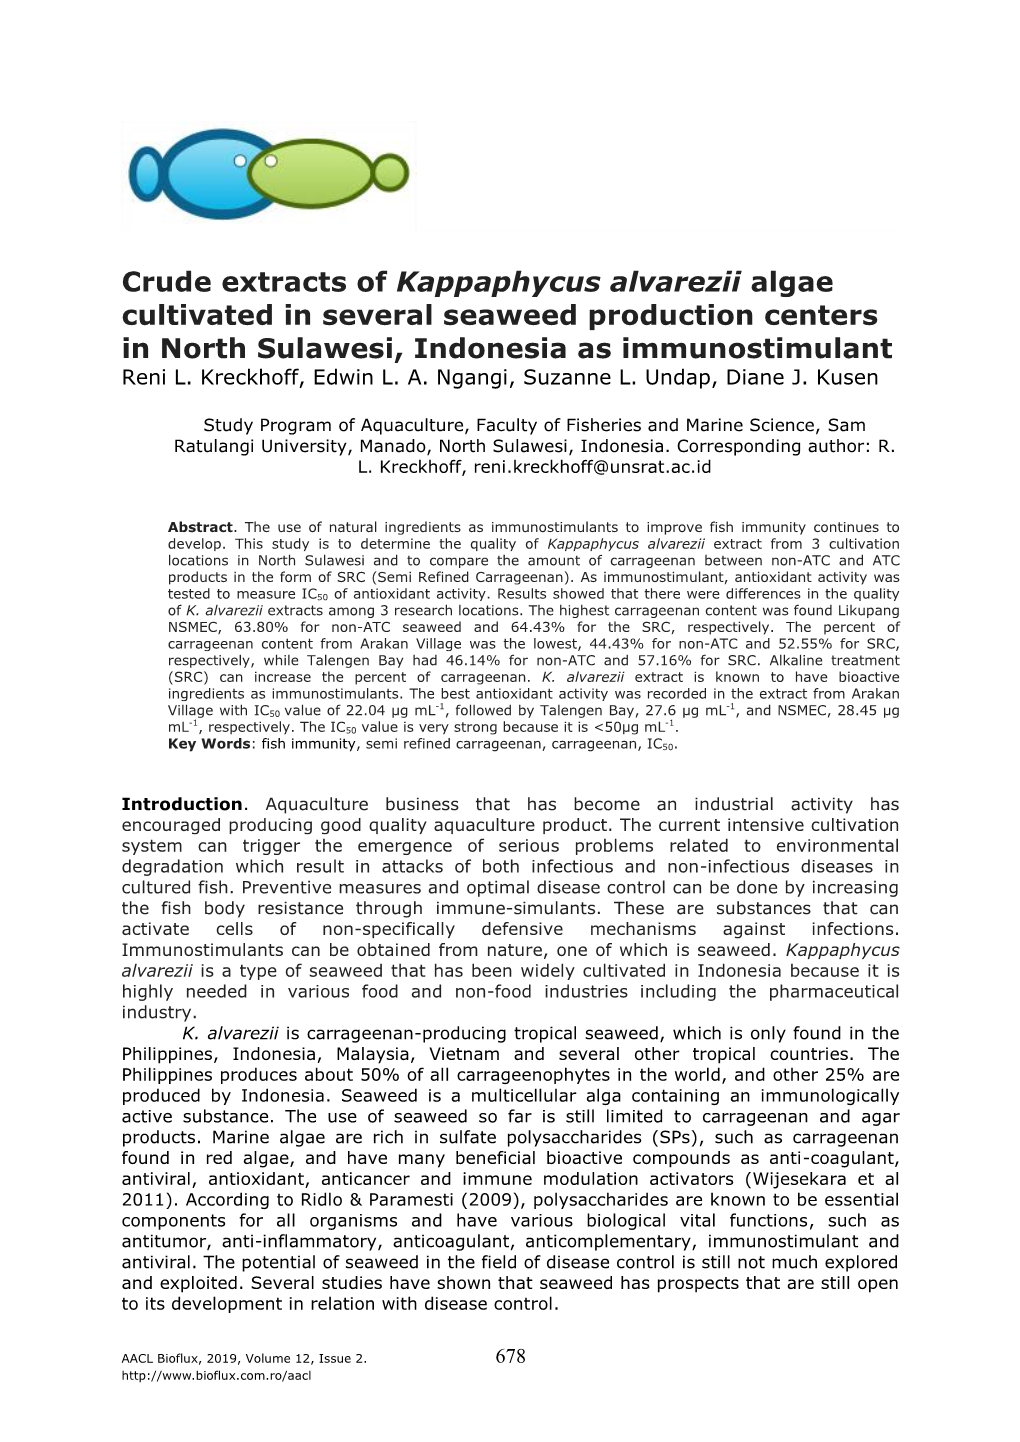 Crude Extracts of Kappaphycus Alvarezii Algae Cultivated in Several Seaweed Production Centers in North Sulawesi, Indonesia As Immunostimulant Reni L